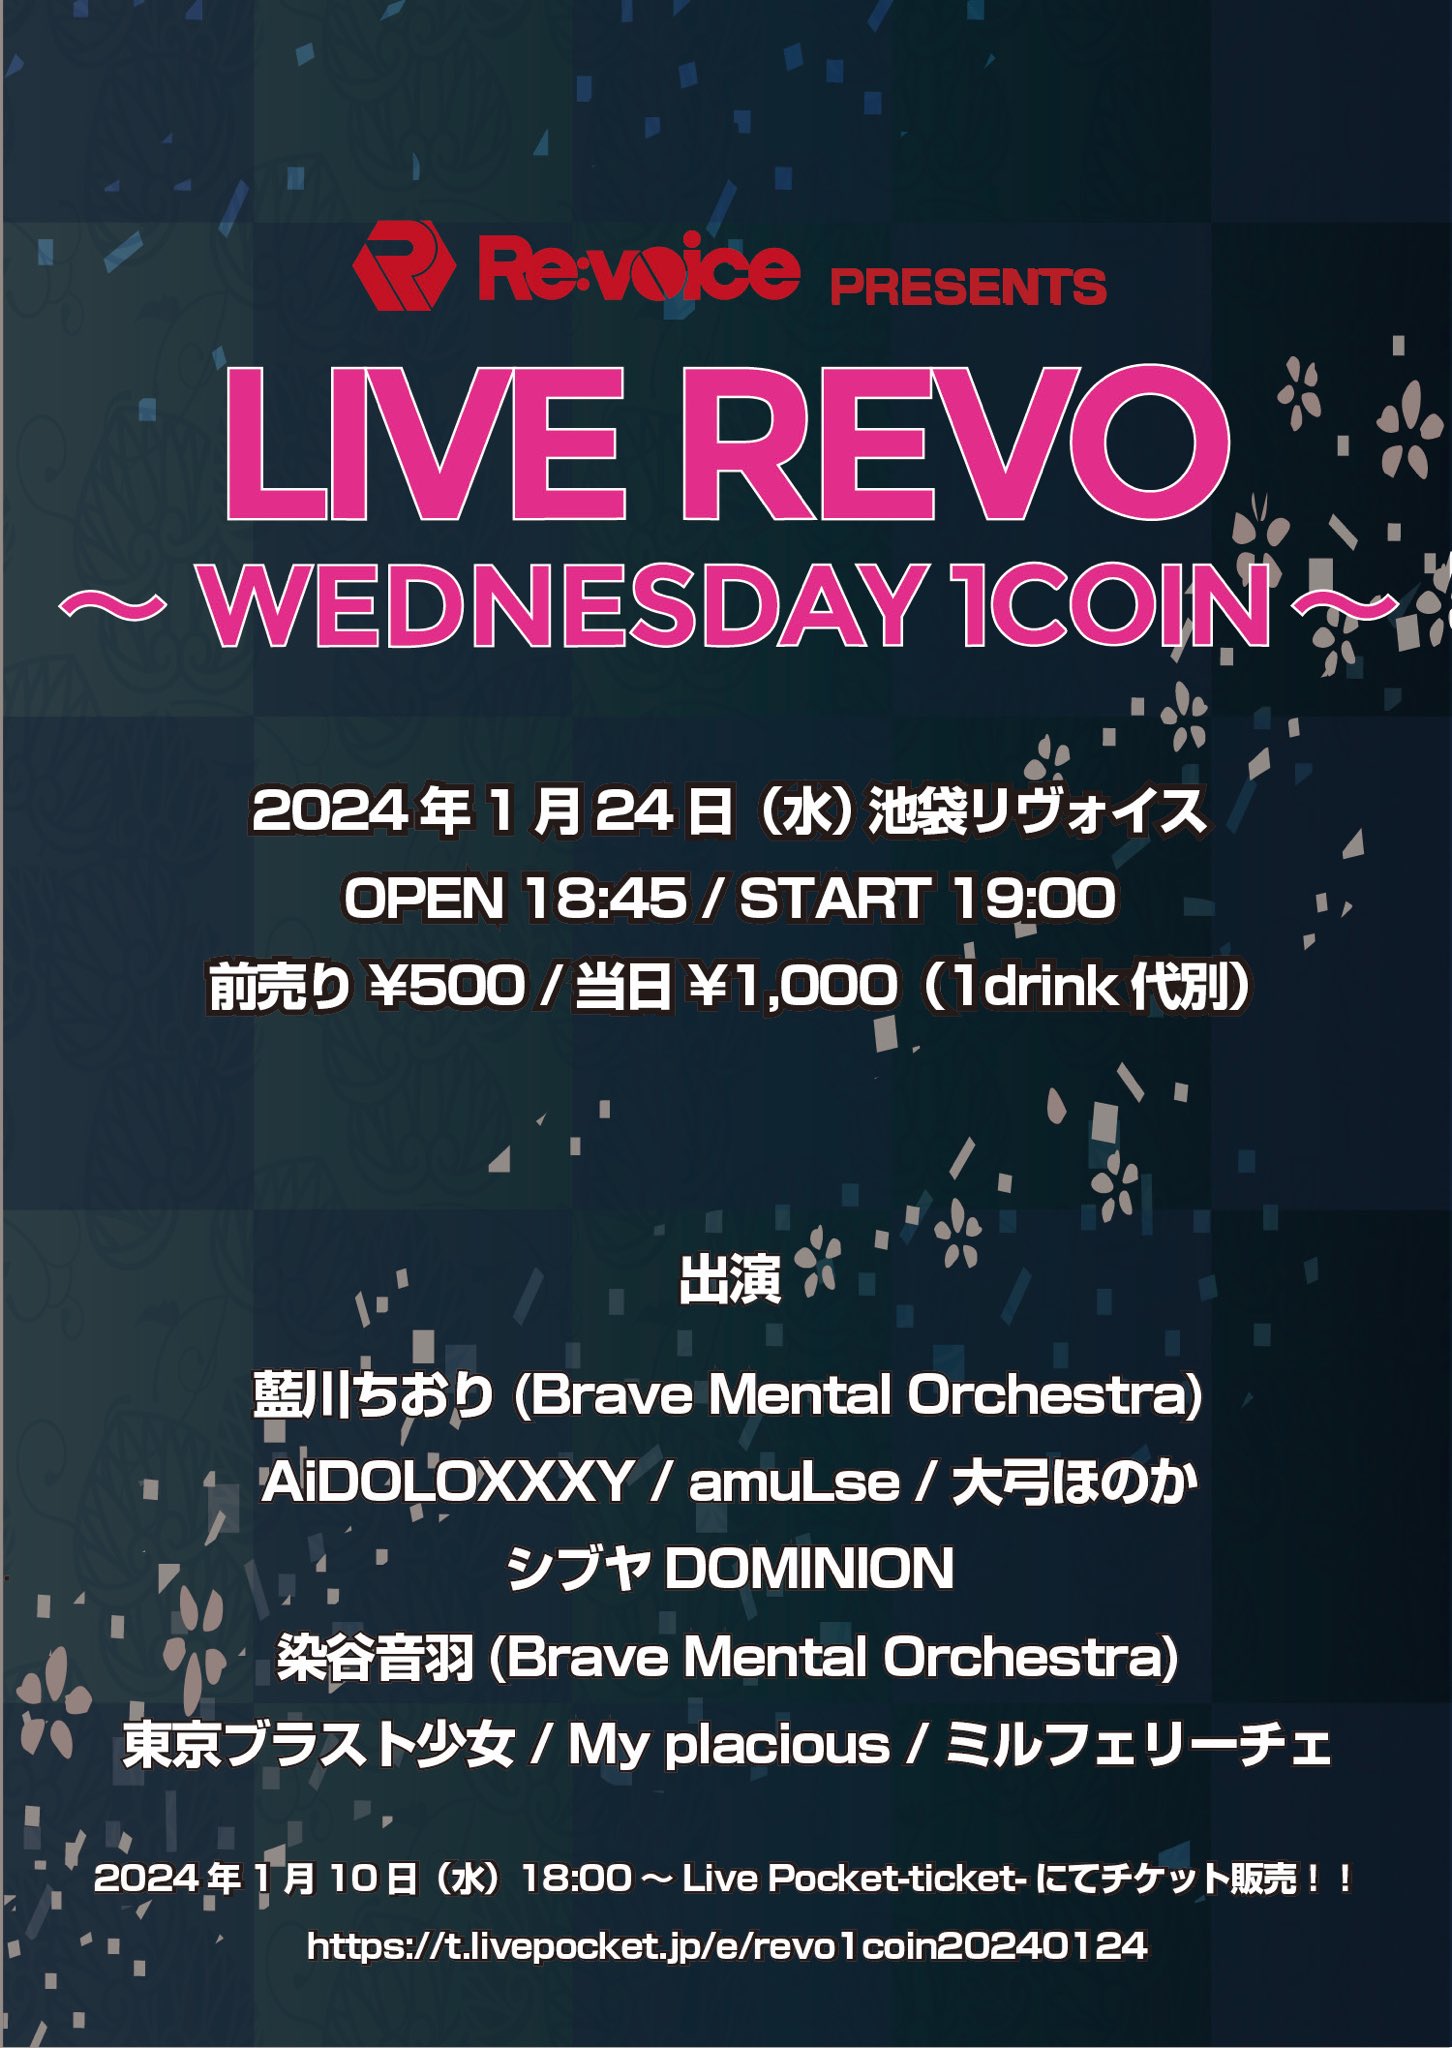 LIVE REVO ～WEDESDAY 1COIN～